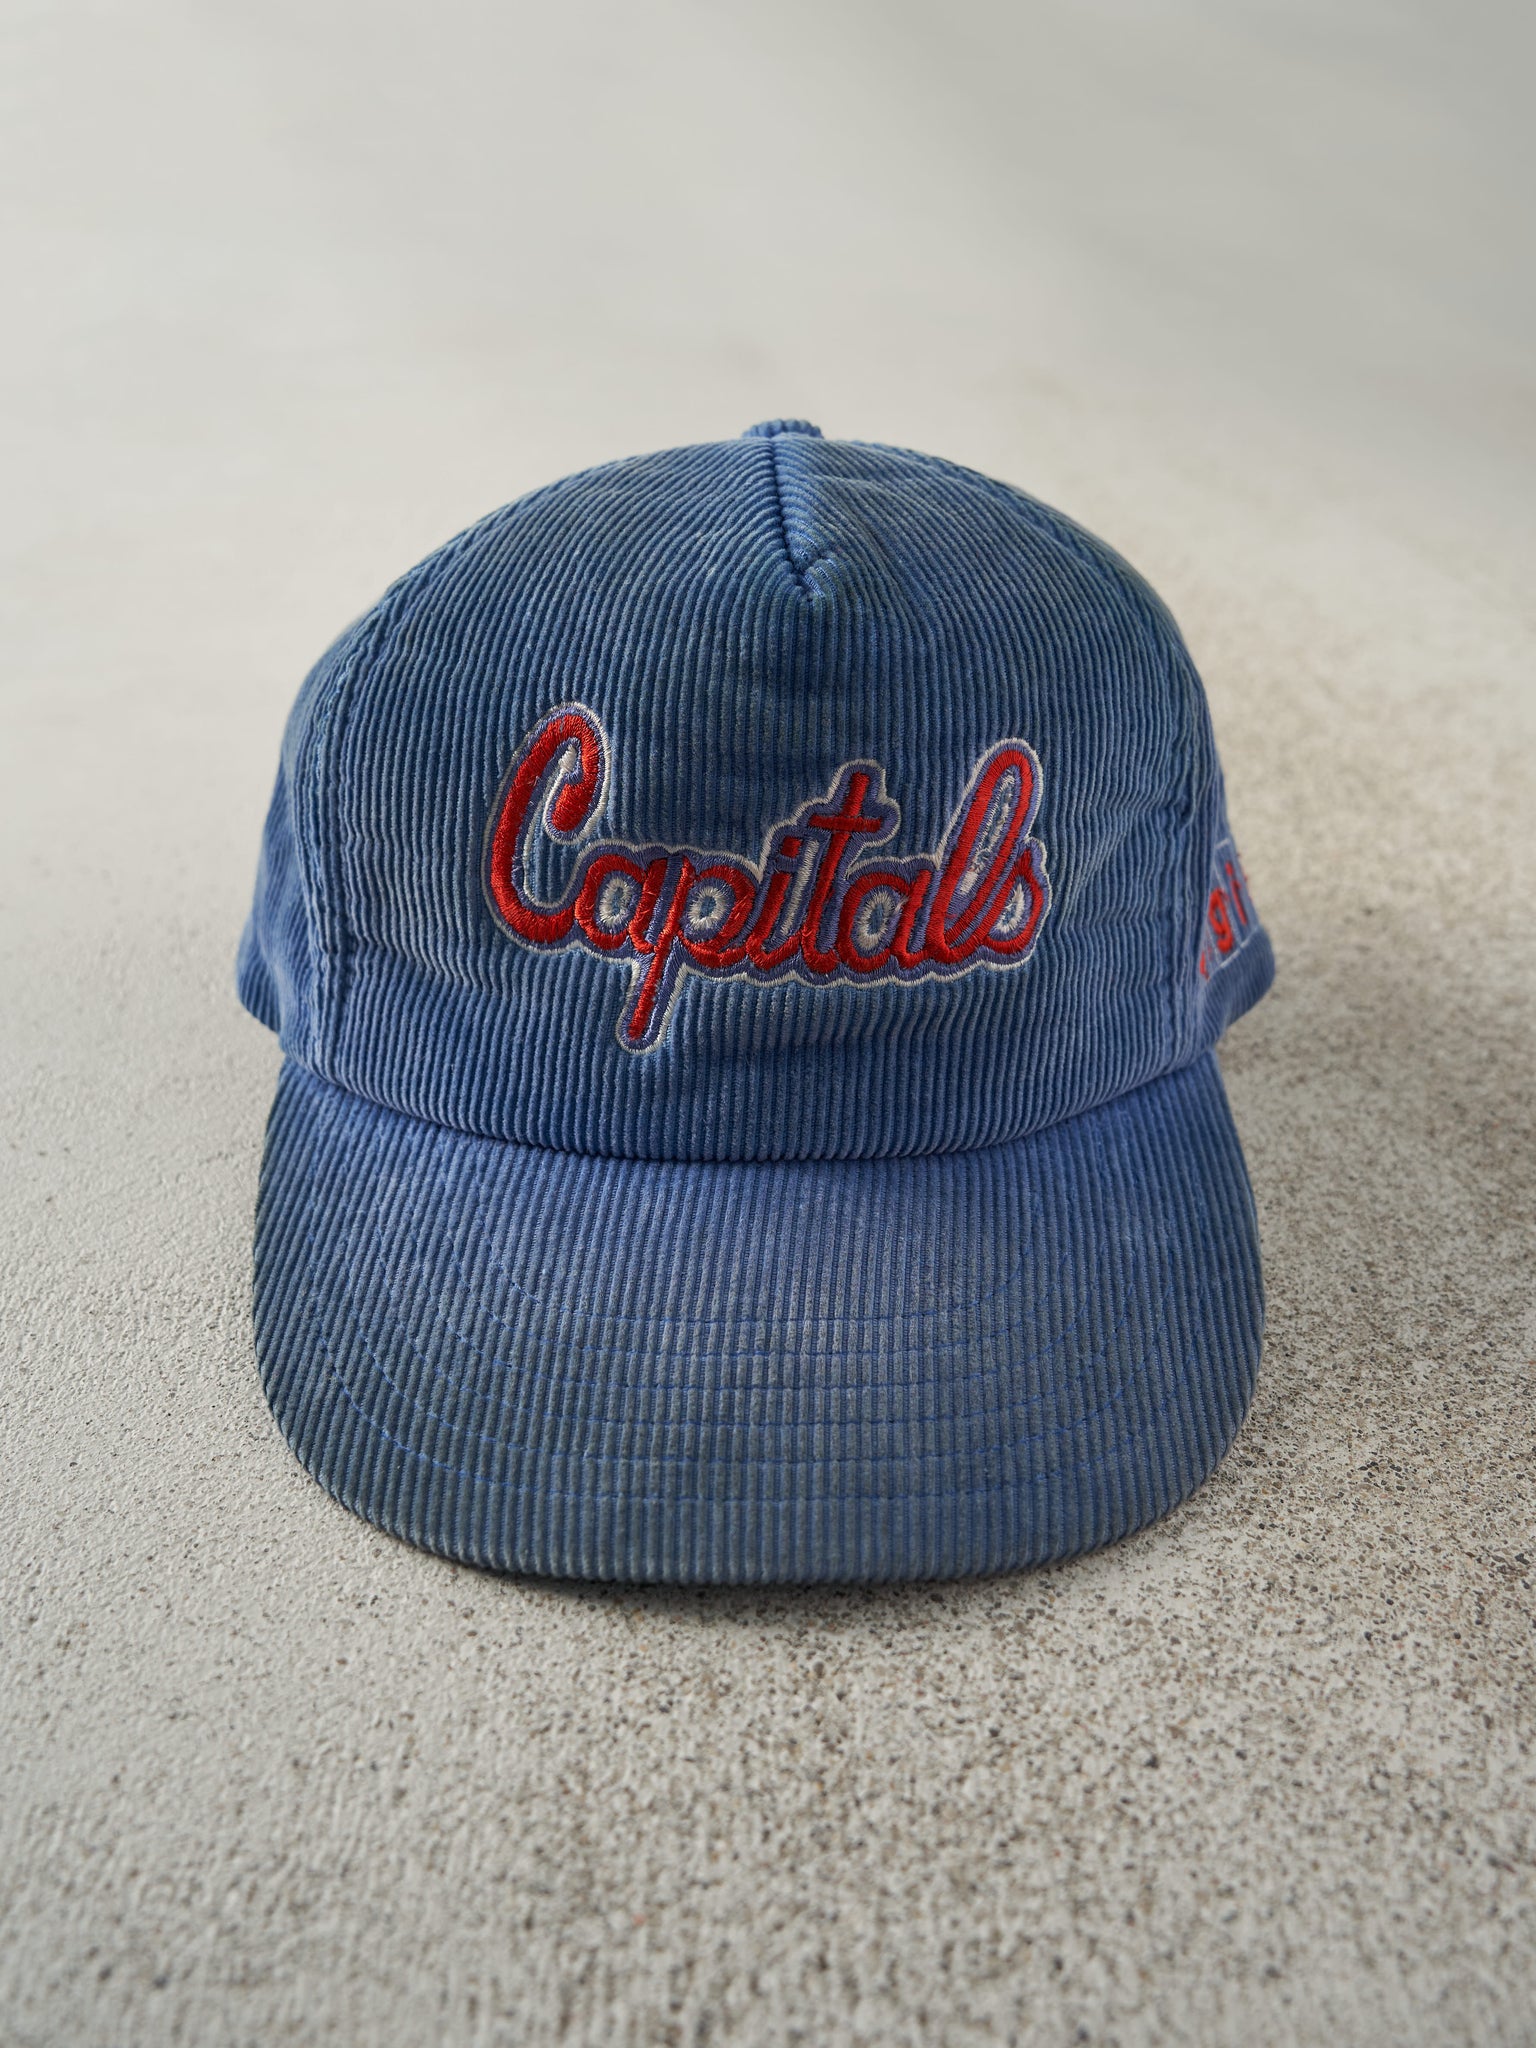 Vintage 80s Blue Embroidered Capitals Corduroy Snapback Hat